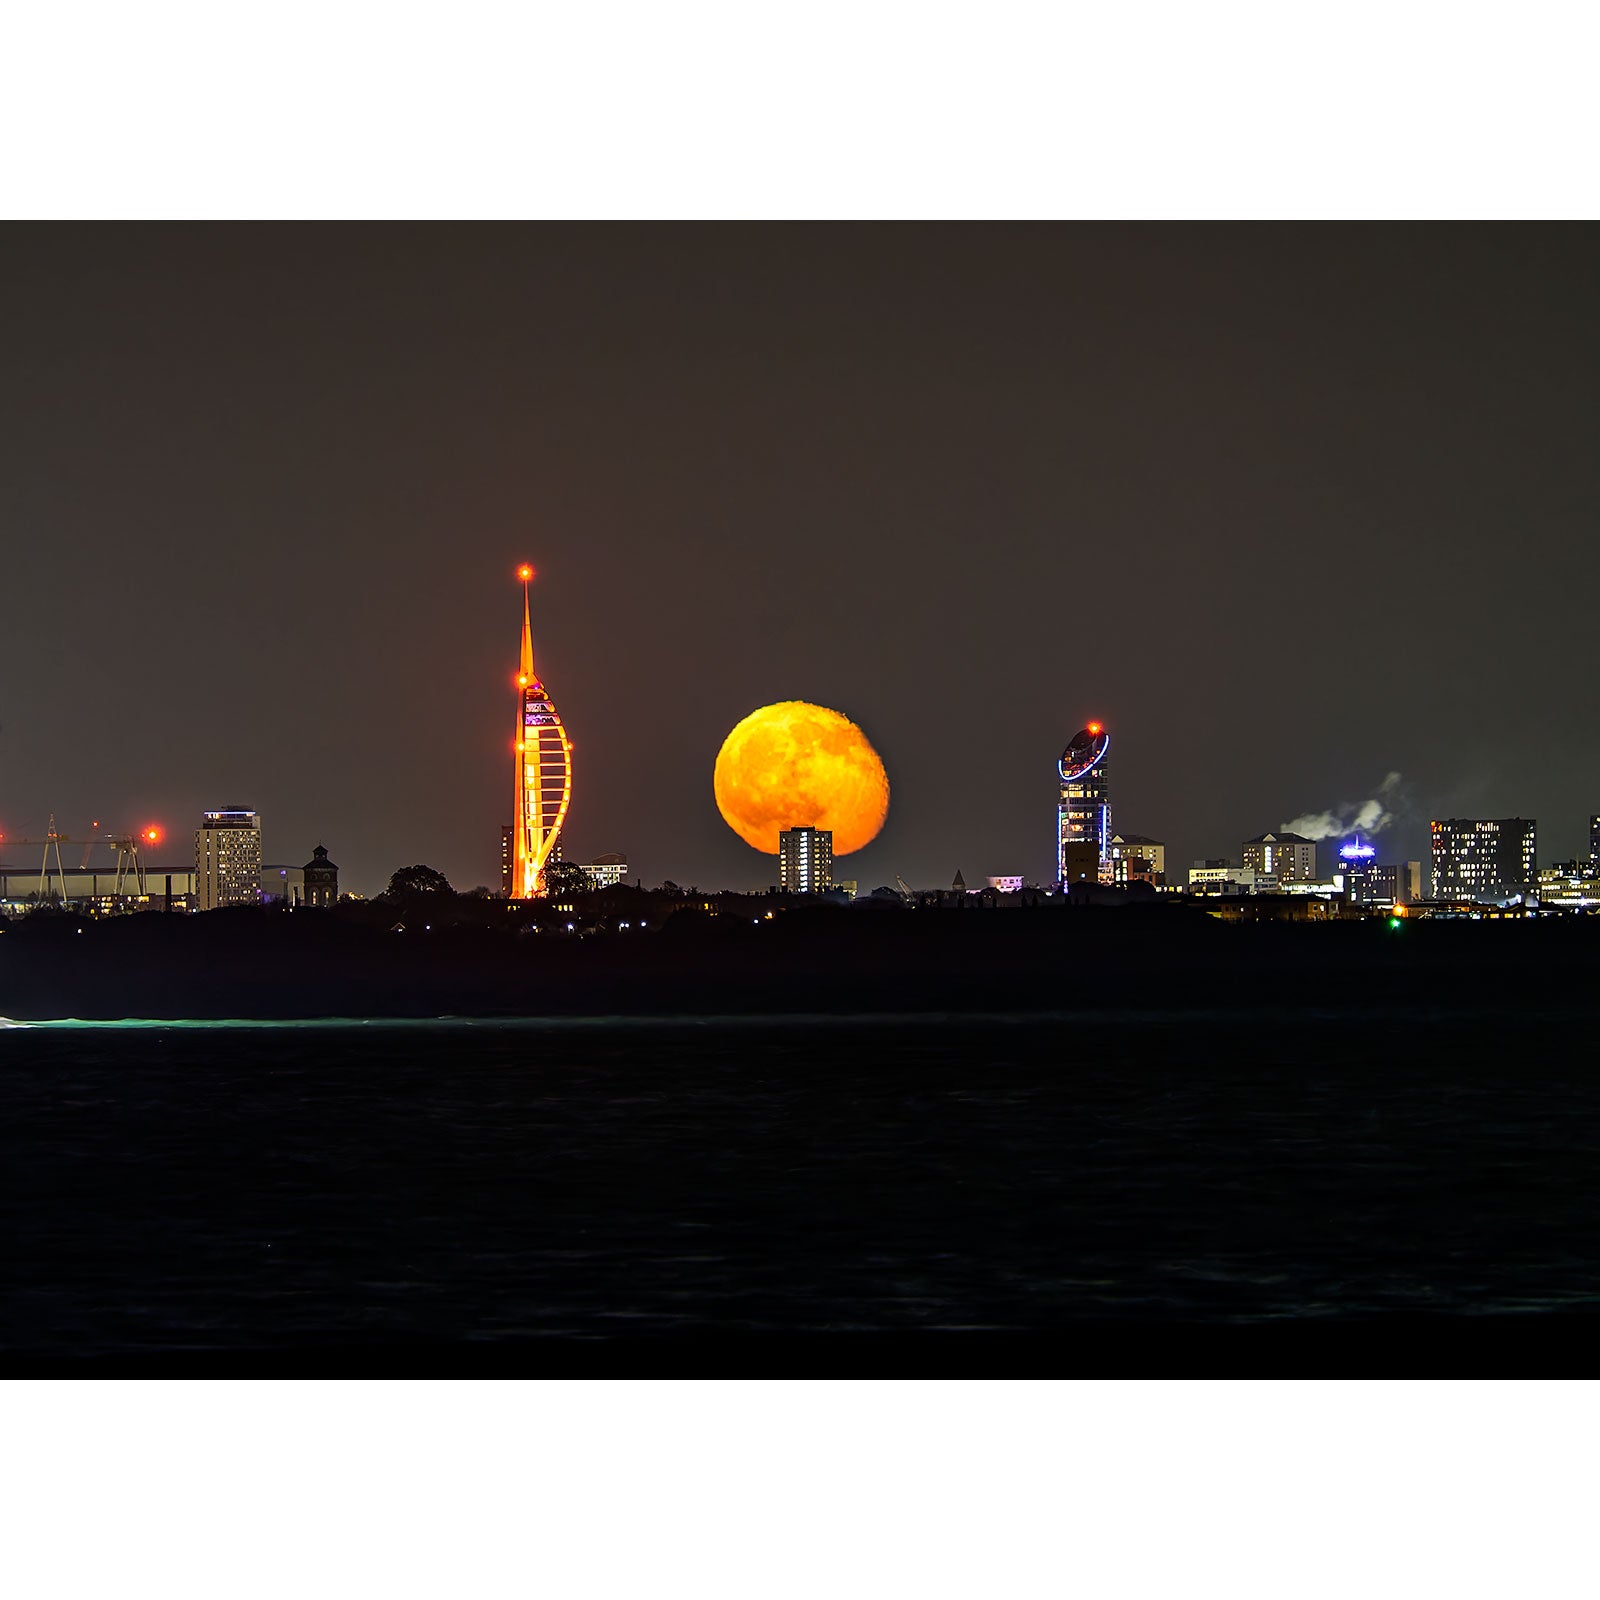 A Moonrise over The Spinnaker Tower rises behind the Gascoigne city skyline at night.